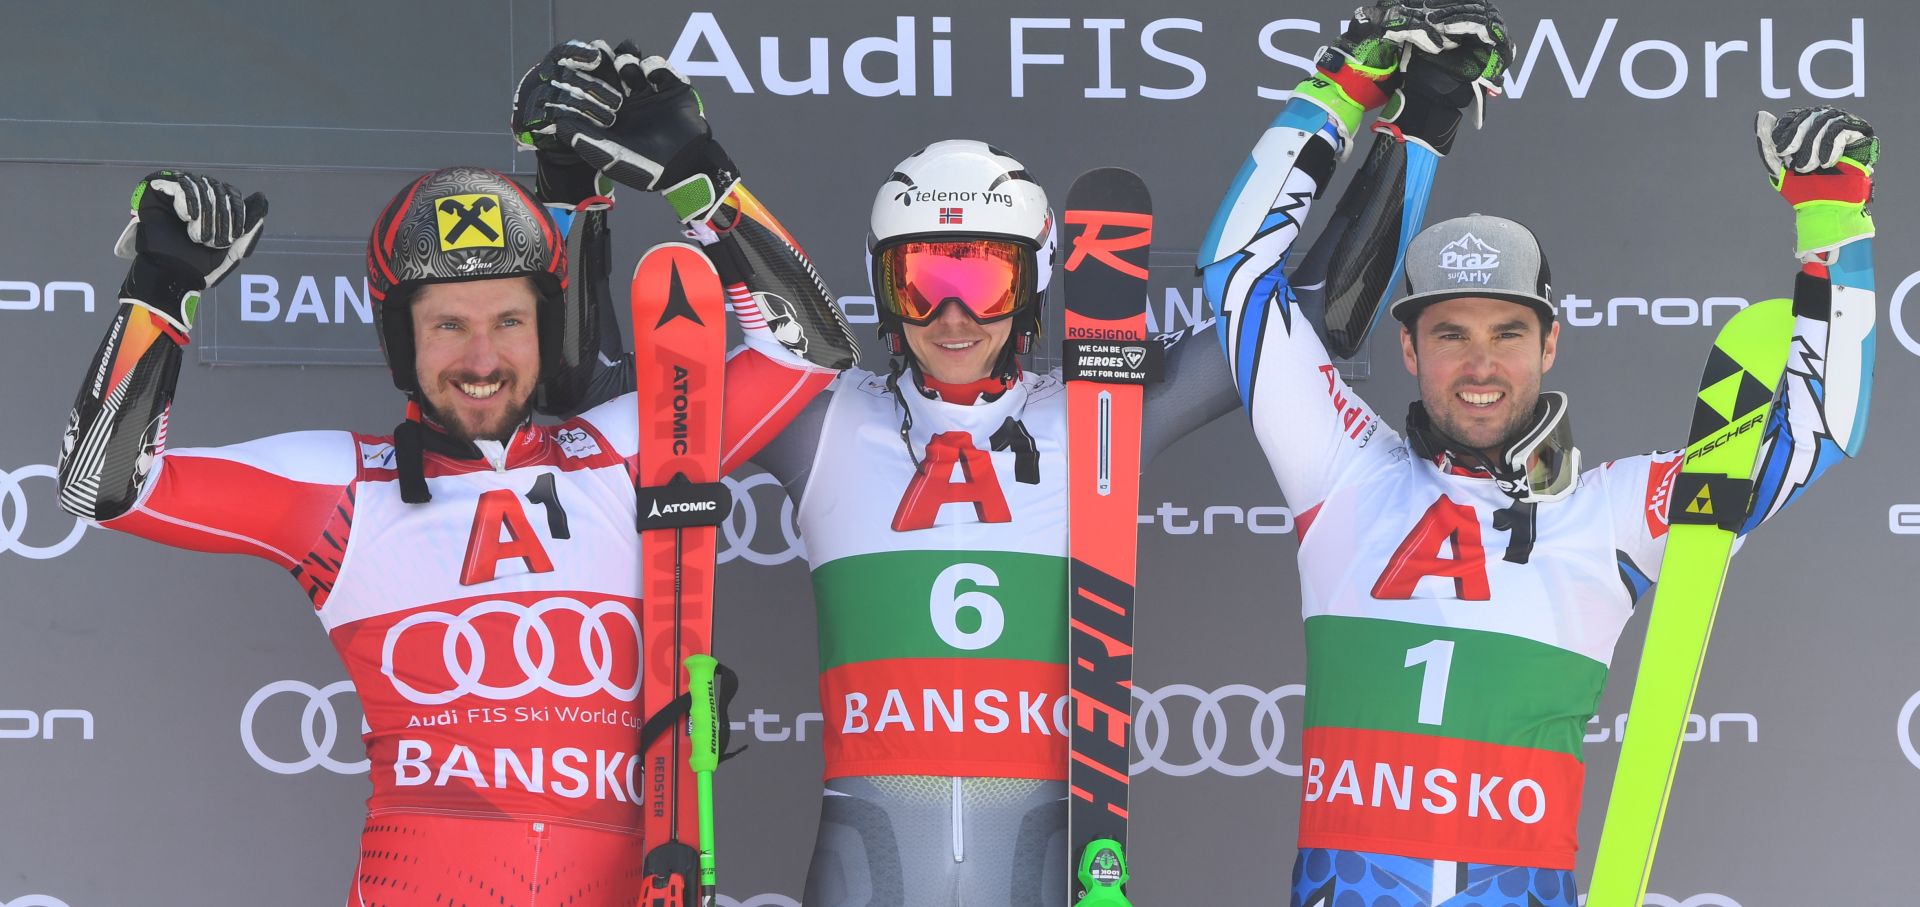 epa07392468 First placed Henrik Kristoffersen (C) of Norway celebrates on the podium next to second placed Marcel Hirscher of Austria (L) and third placed Thomas Fanara (R) of France after the Men's Giant Slalom at the FIS Alpine Skiing World Cup in Bansko, Bulgaria 24 February 2019.  EPA/GEORGI LICOVSKI